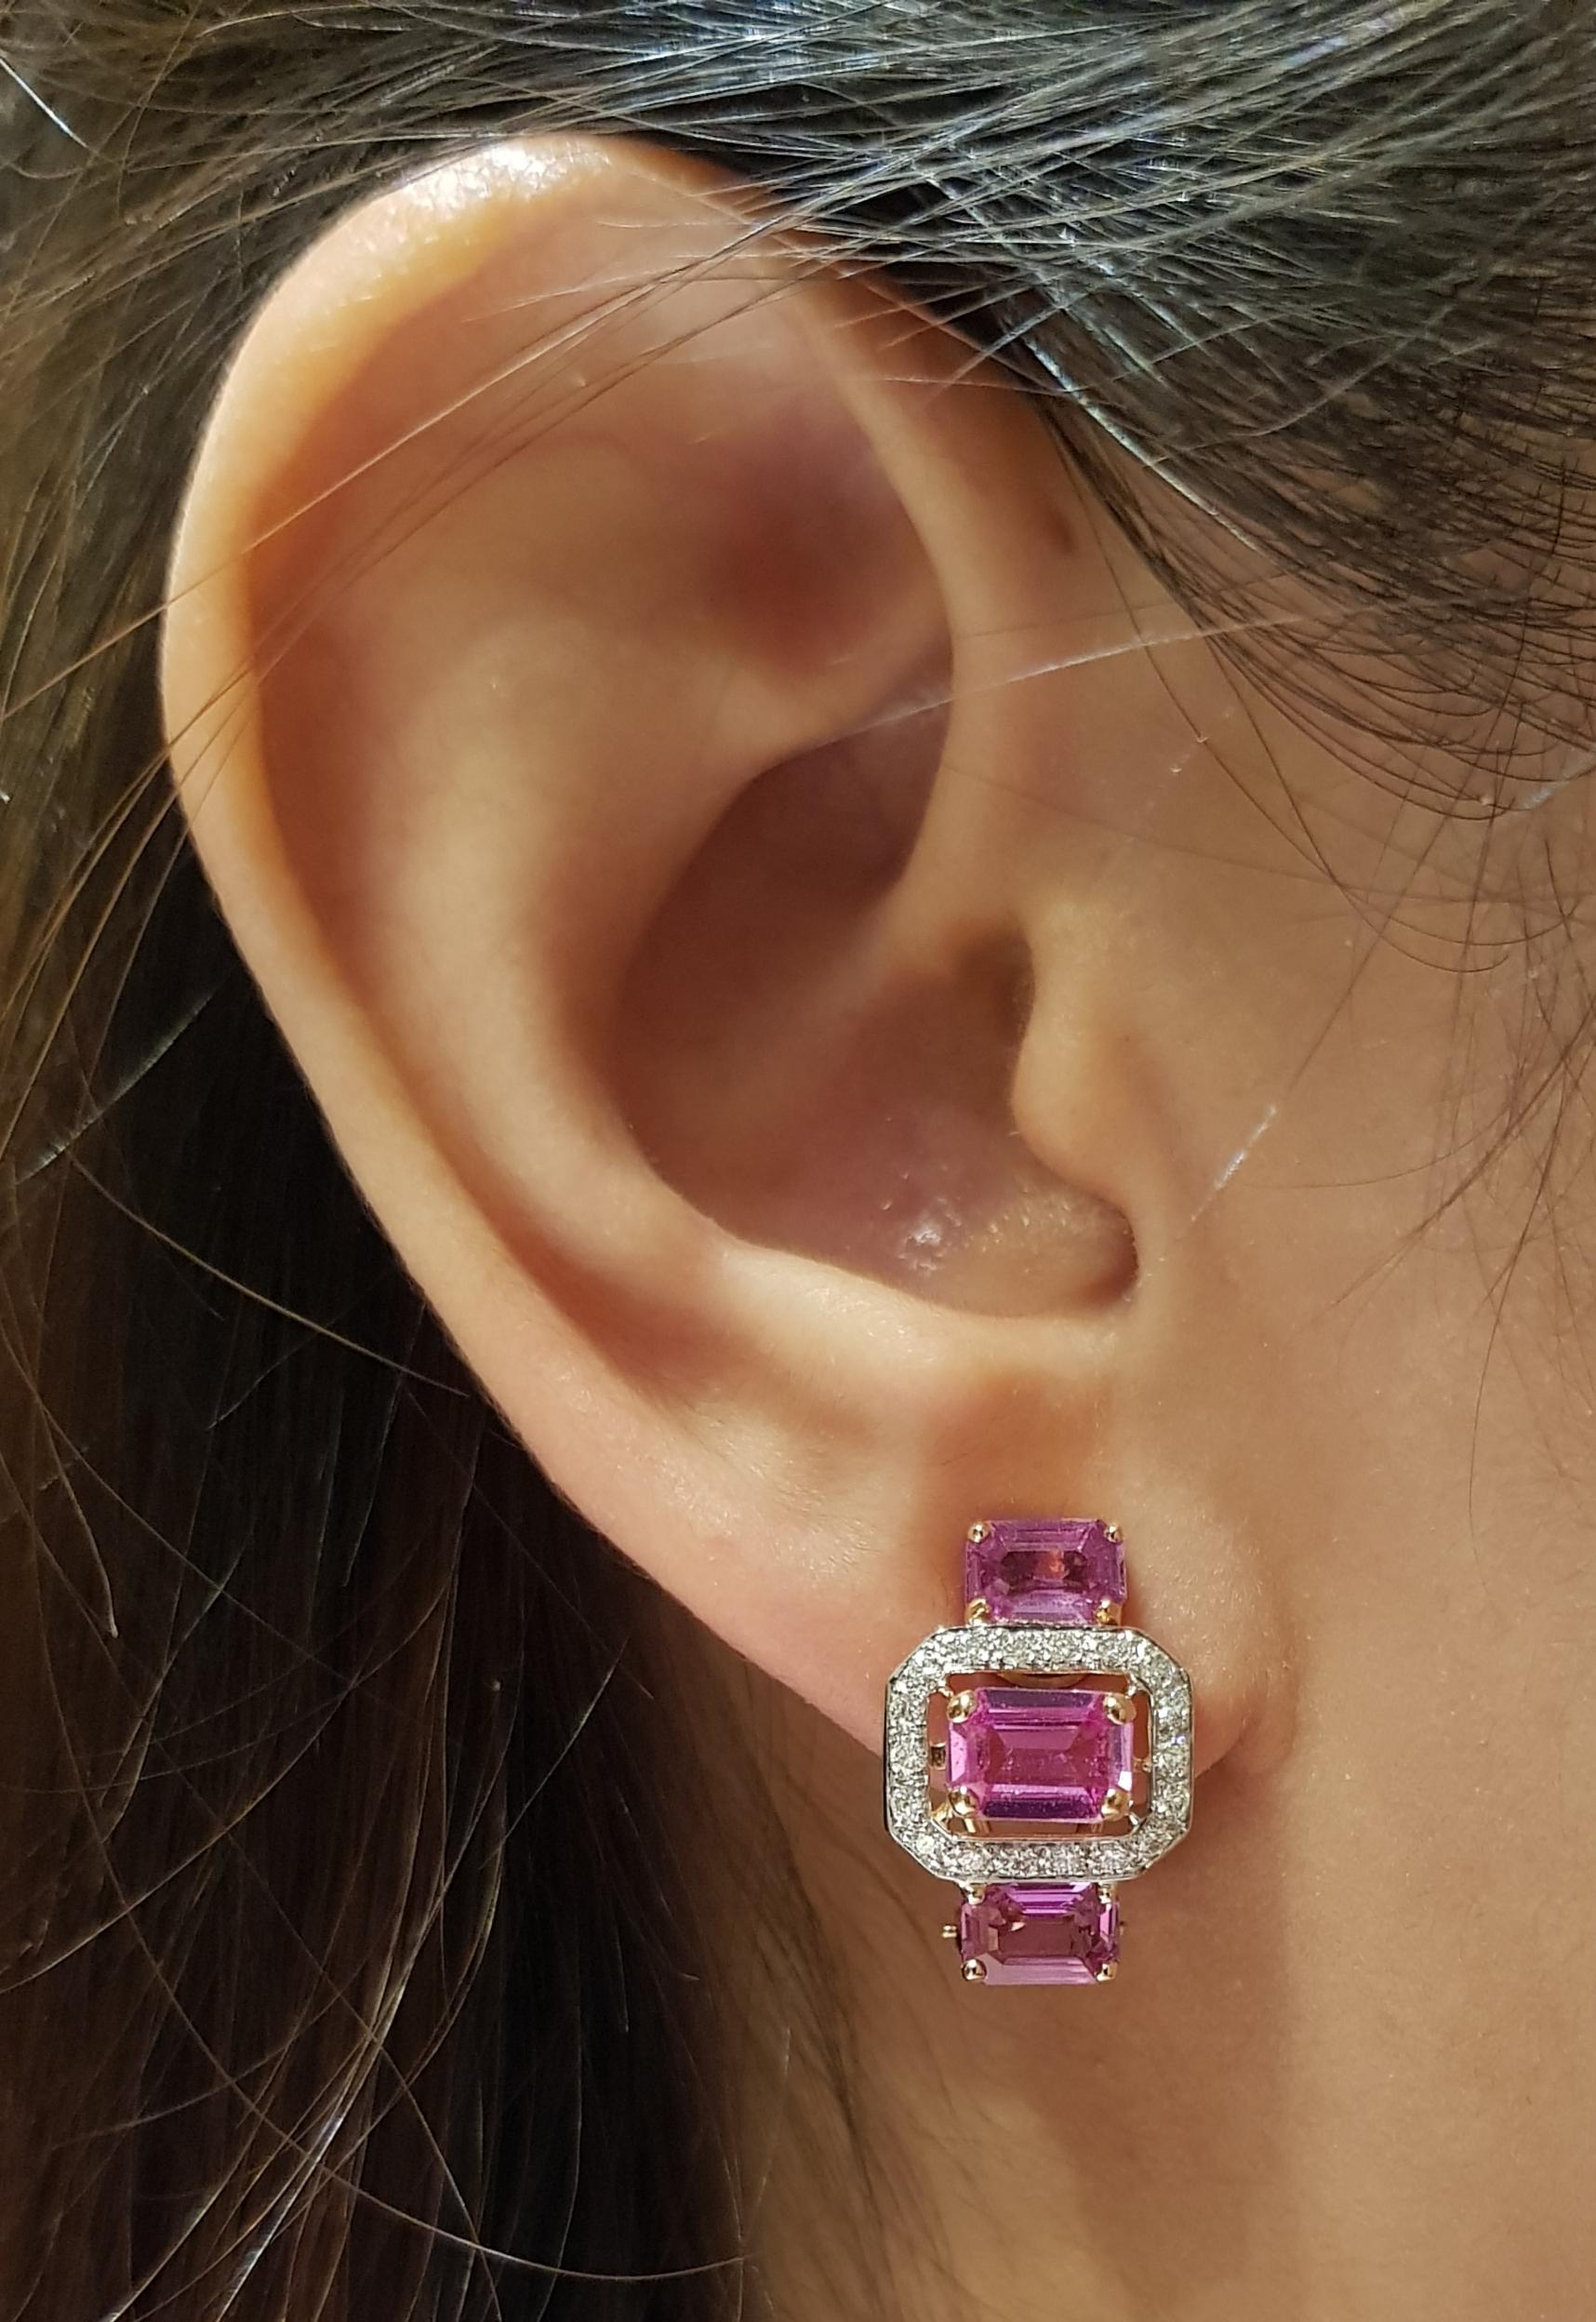 Pink Sapphire 3.82 carats with Diamond 0.31 carat Earrings set in 18 Karat Rose Gold Settings

Width:  1.1 cm 
Length:  1.8 cm
Total Weight: 7.6 grams

